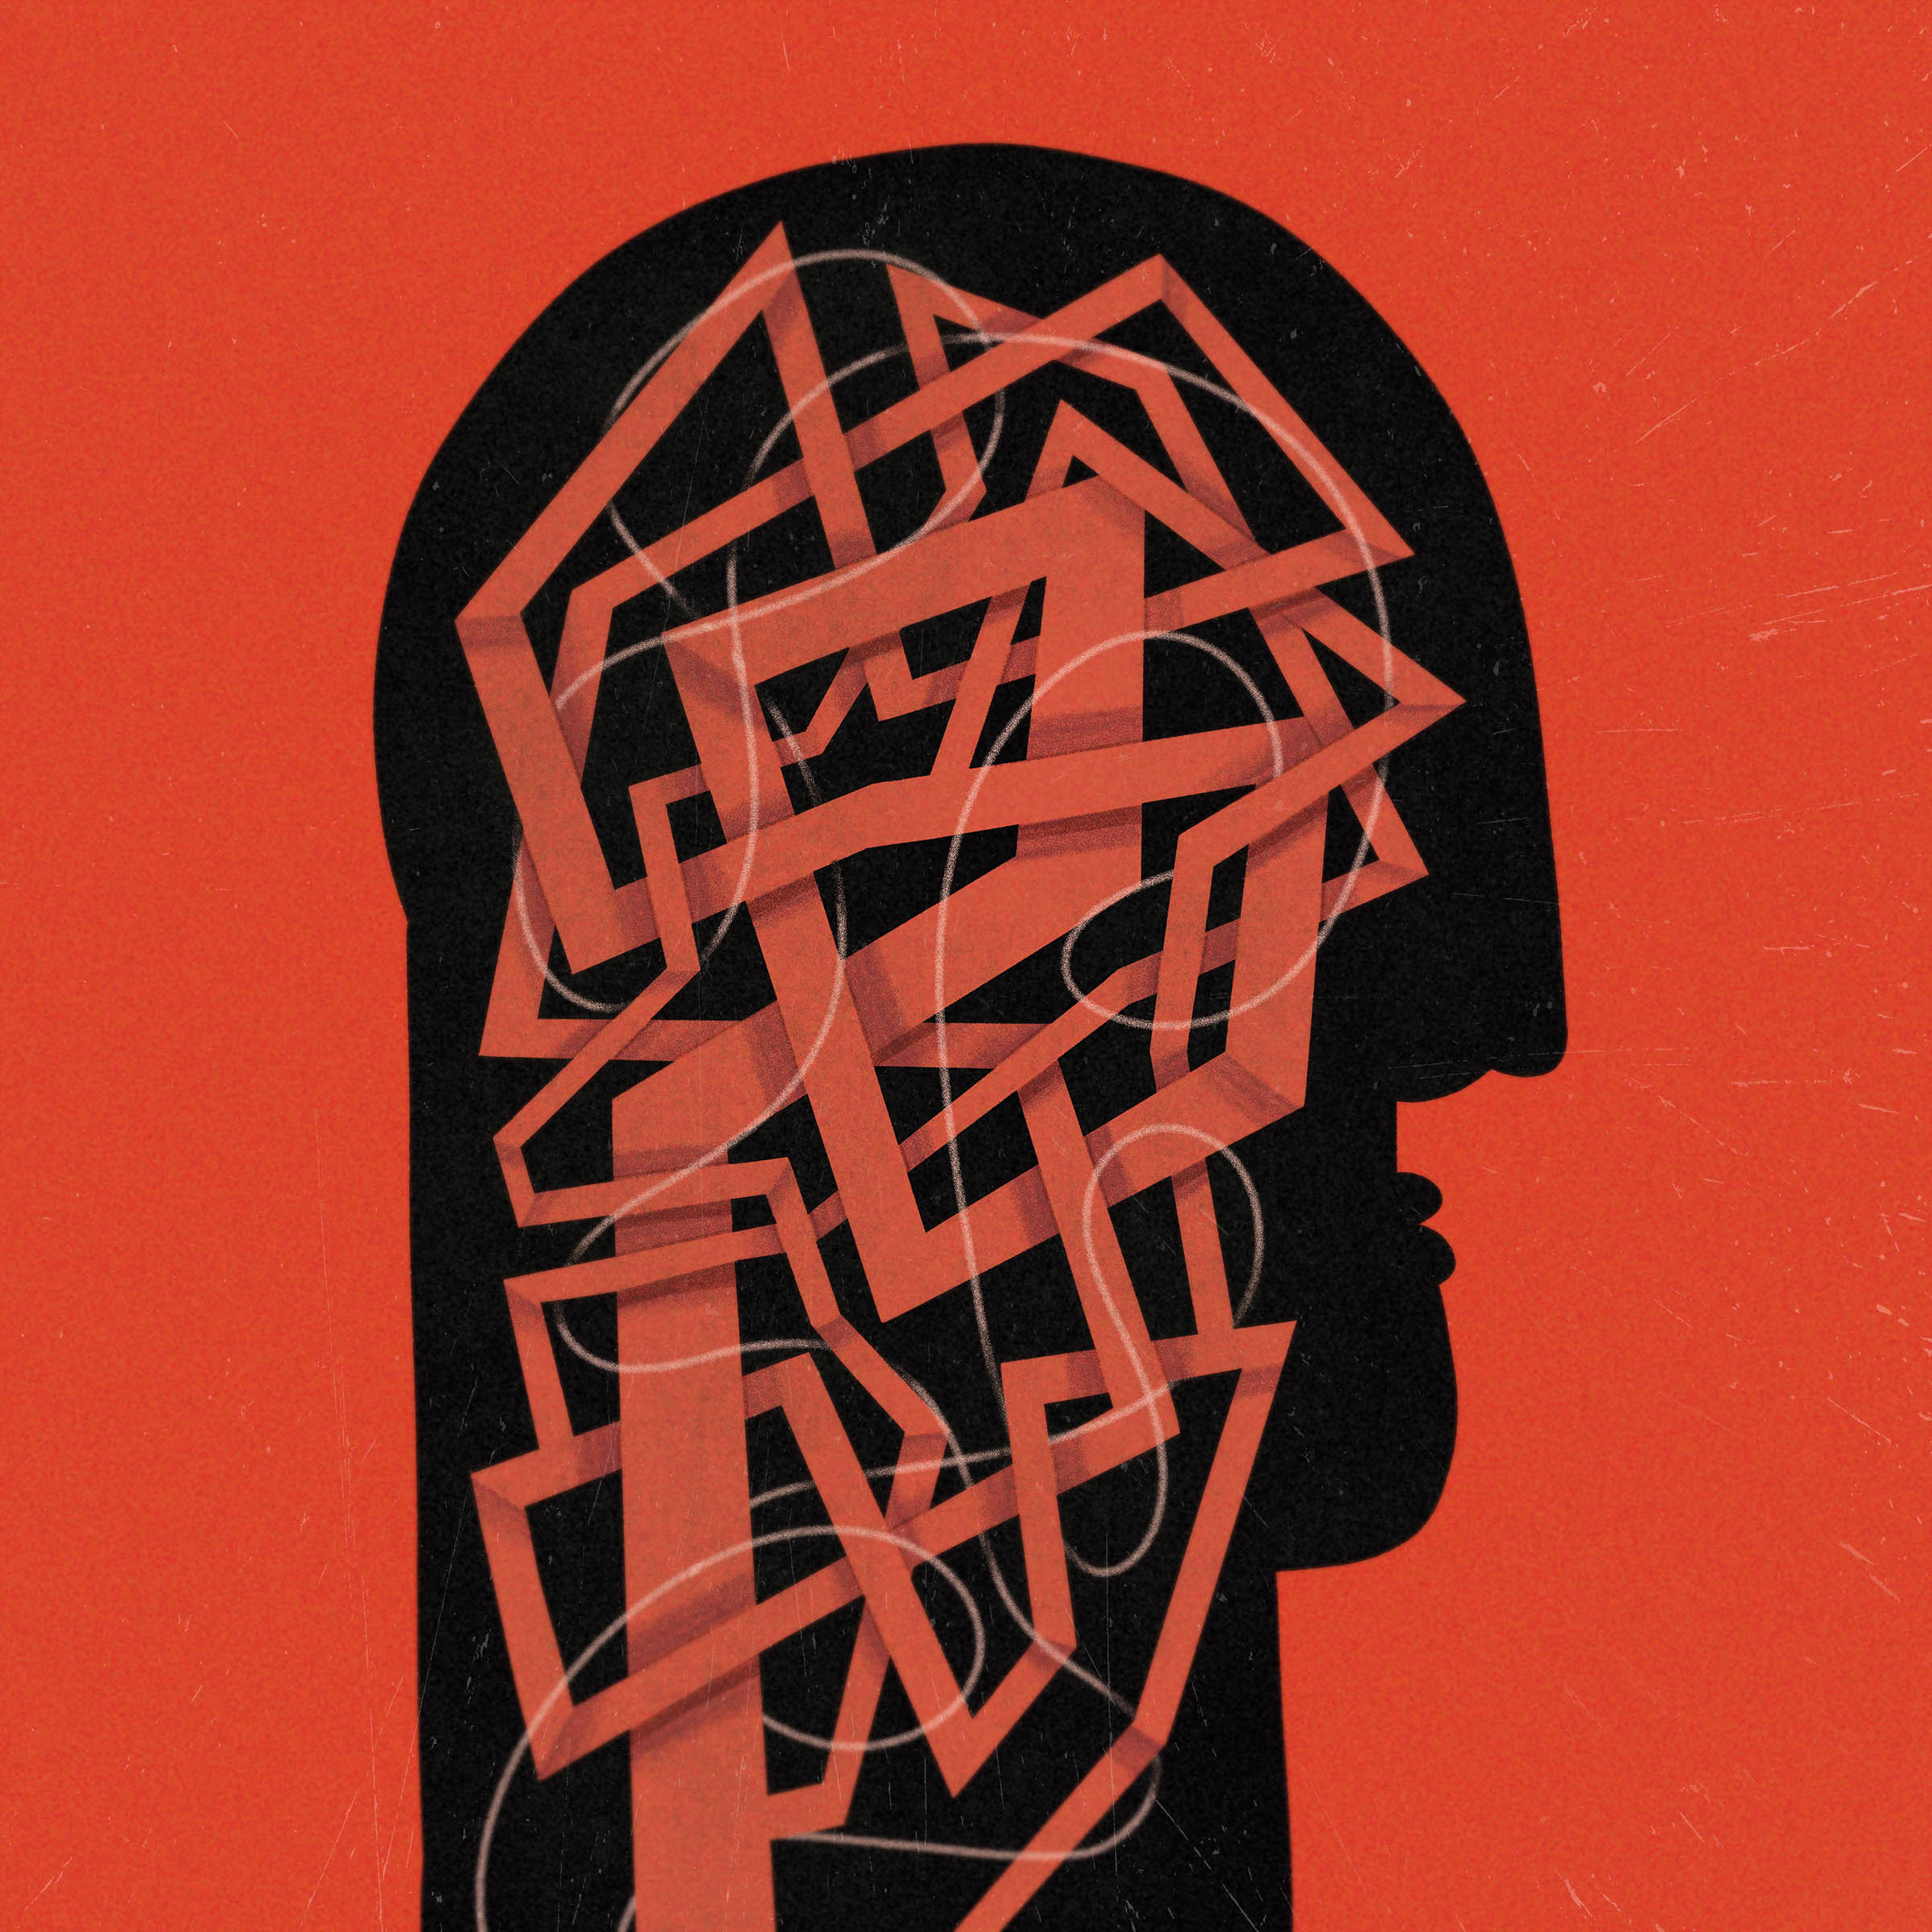 A silhouette of a head with a bunch of tangled thoughts inside.